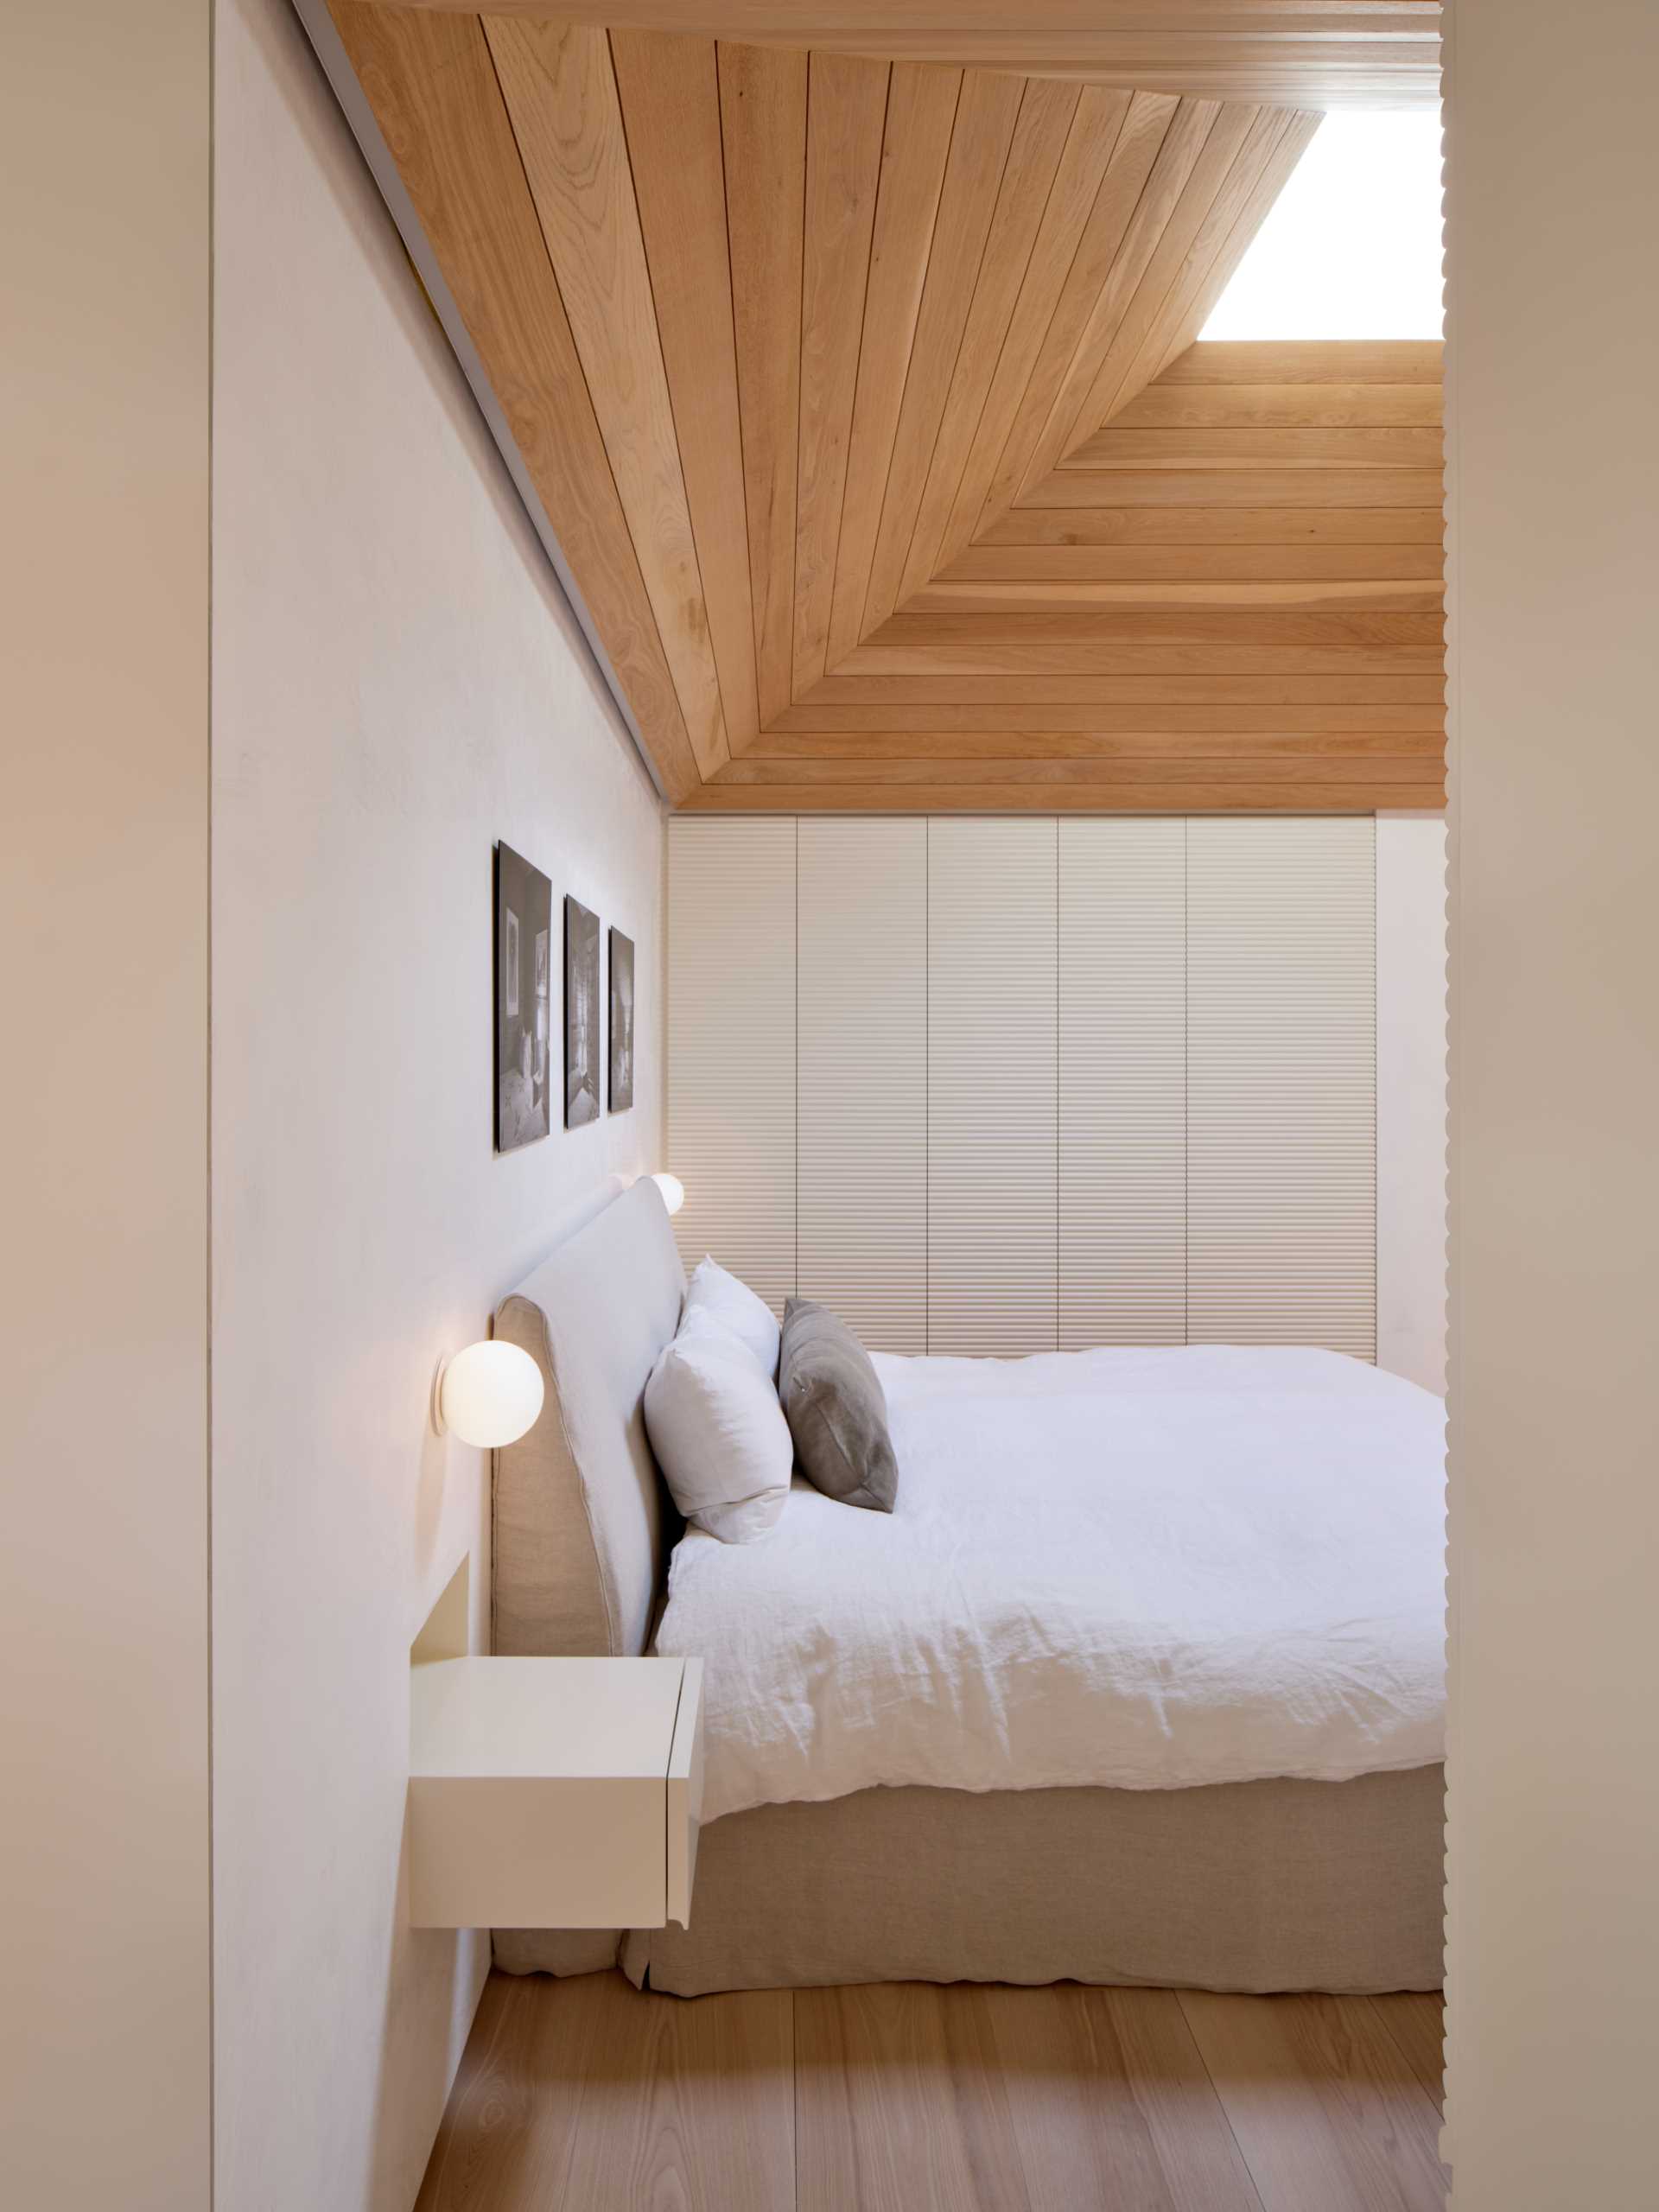 This bedroom has a white oak vaulted ceiling whose skylight pulls morning light down into the space. 